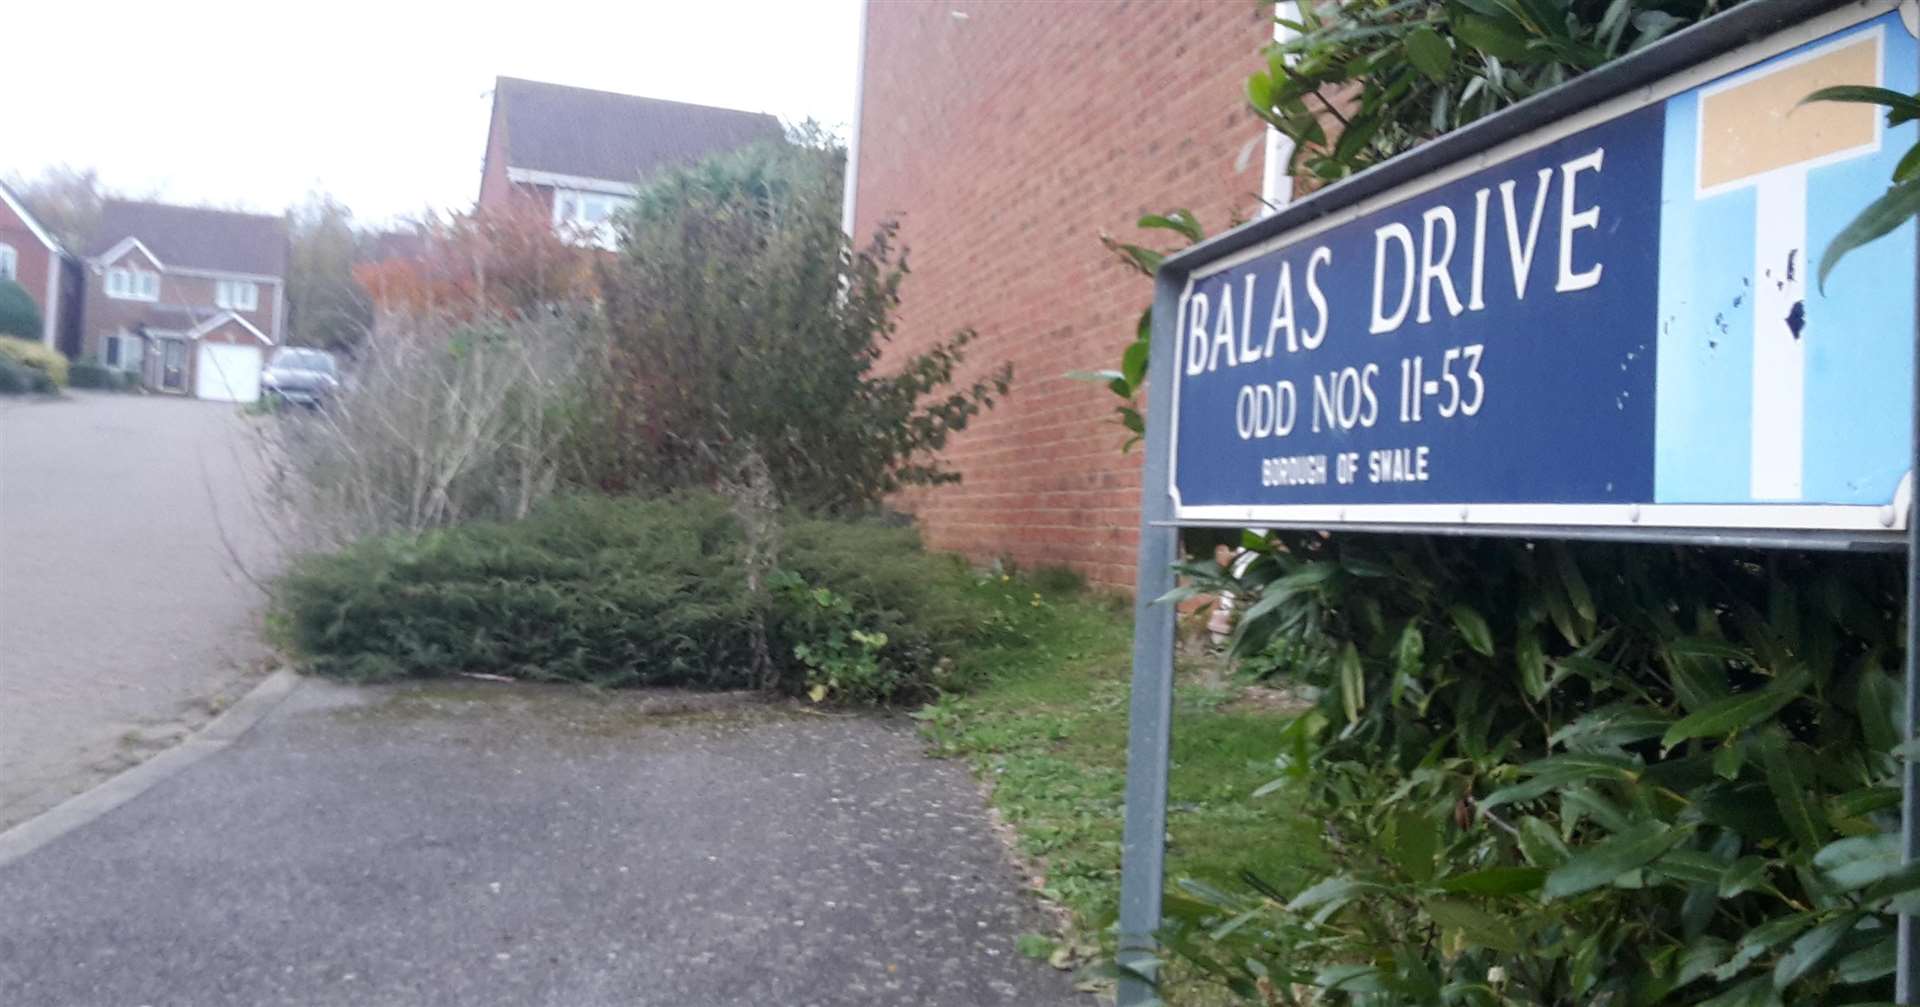 The family were targeted as they arrived home at Balas Drive (5325874)